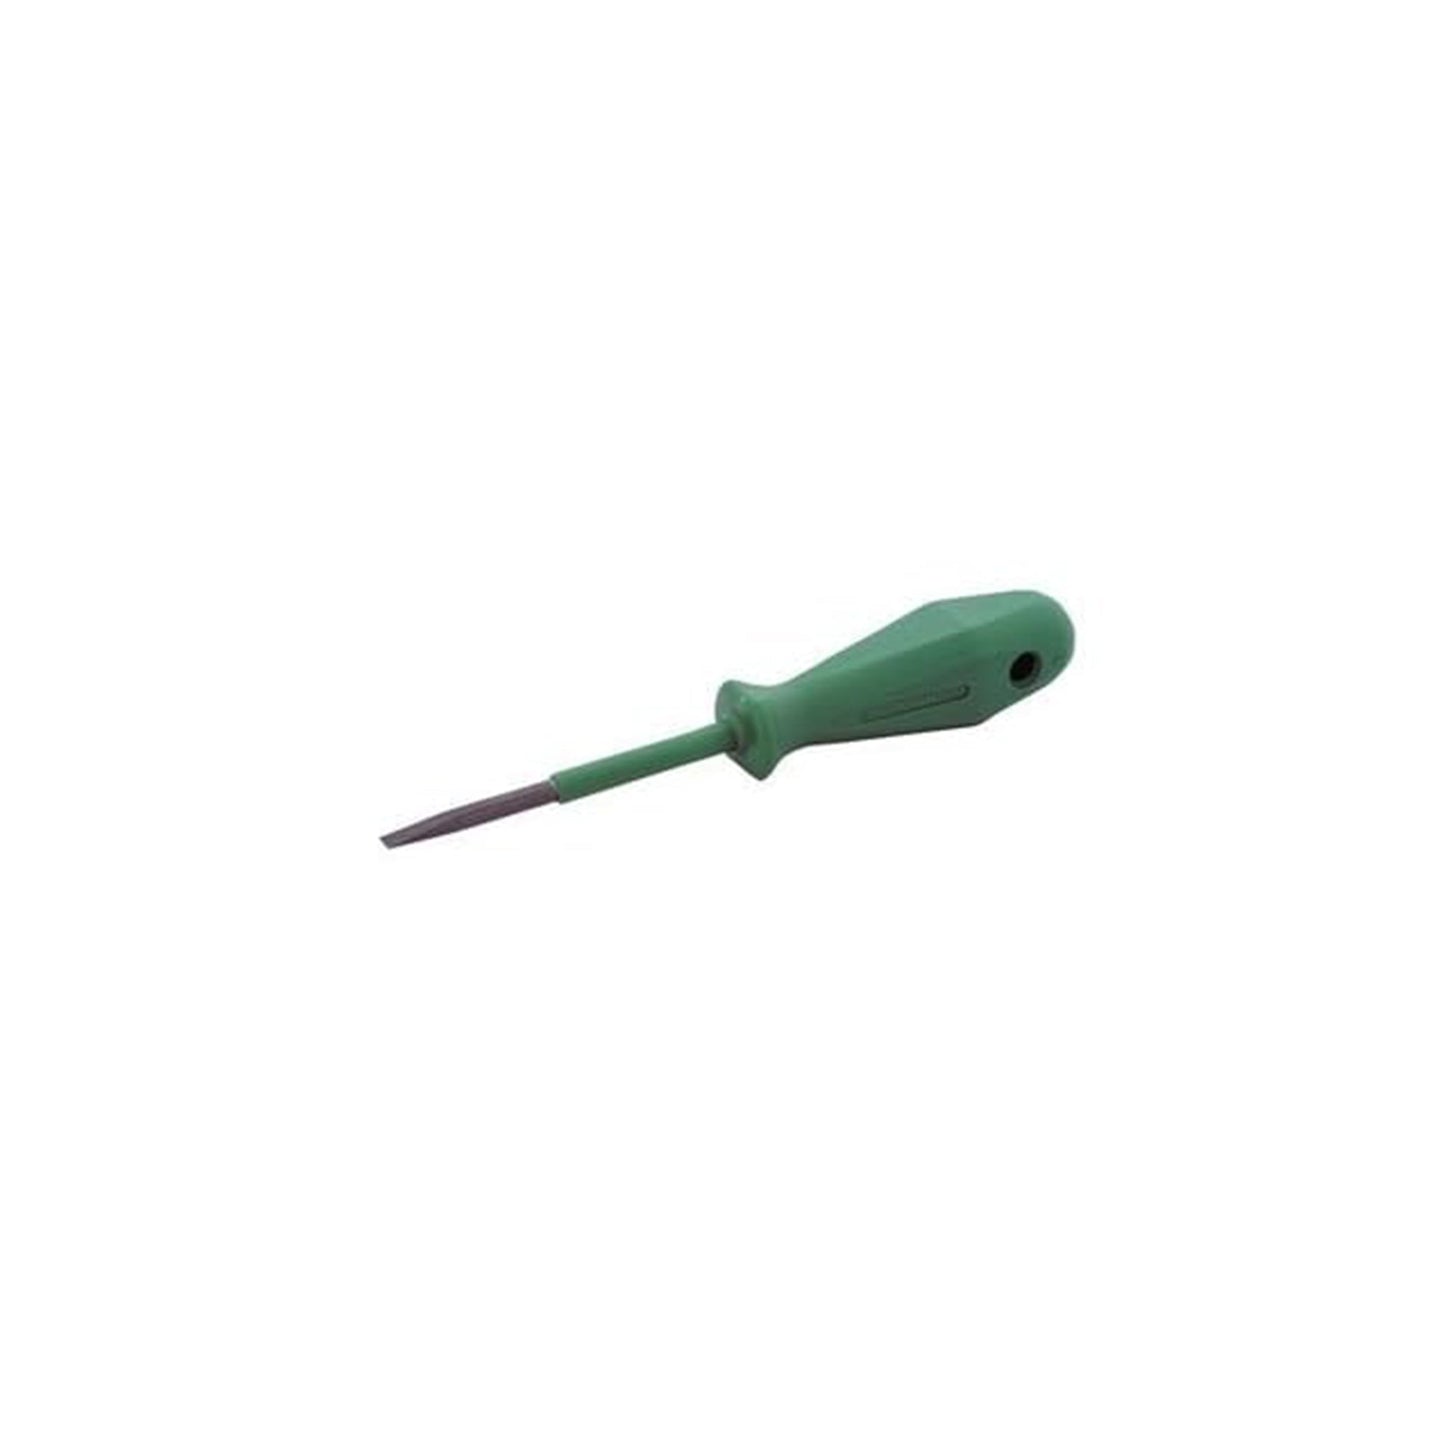 Wago 210-621 | Short Operating Tool with Partially Insulated Shaft Blade